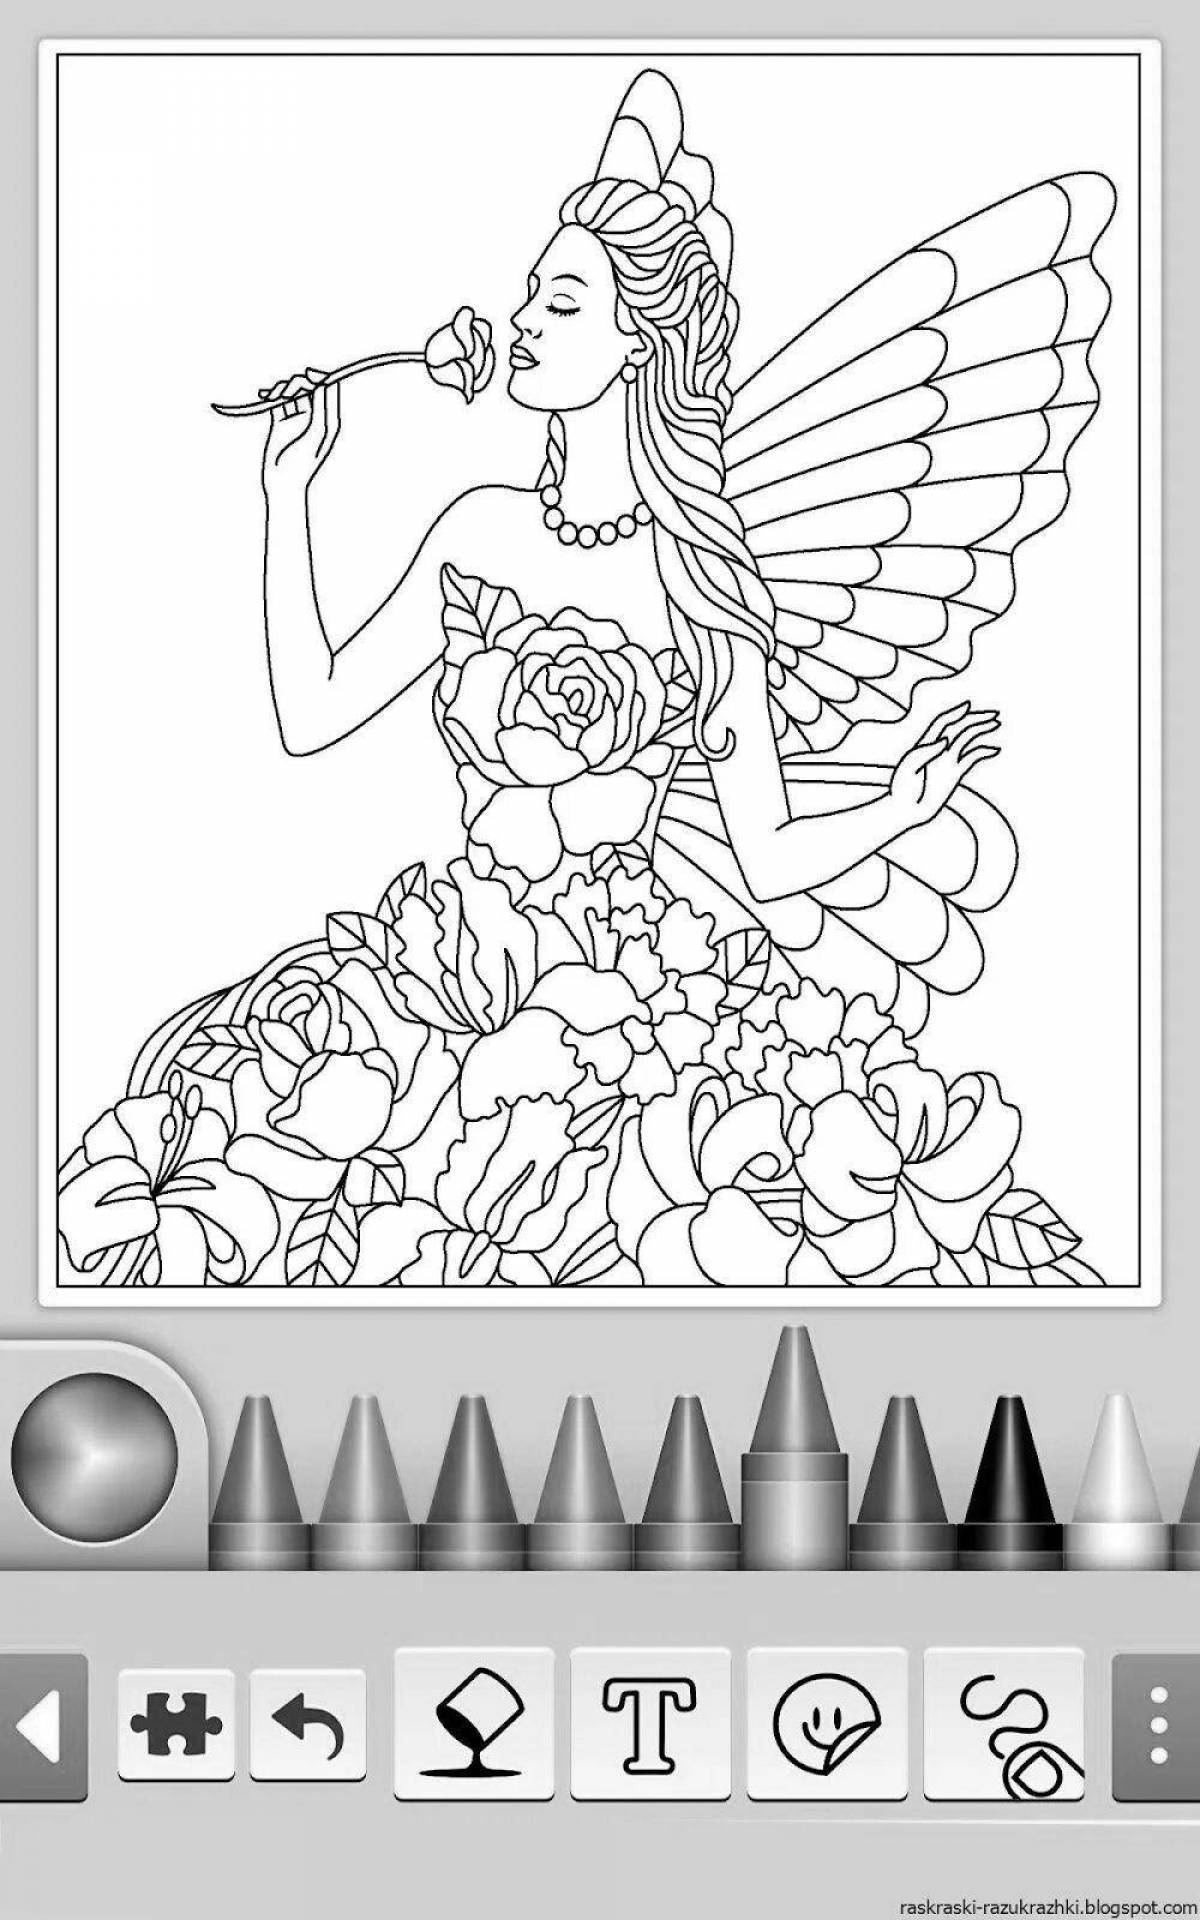 Colorful coloring game for girls